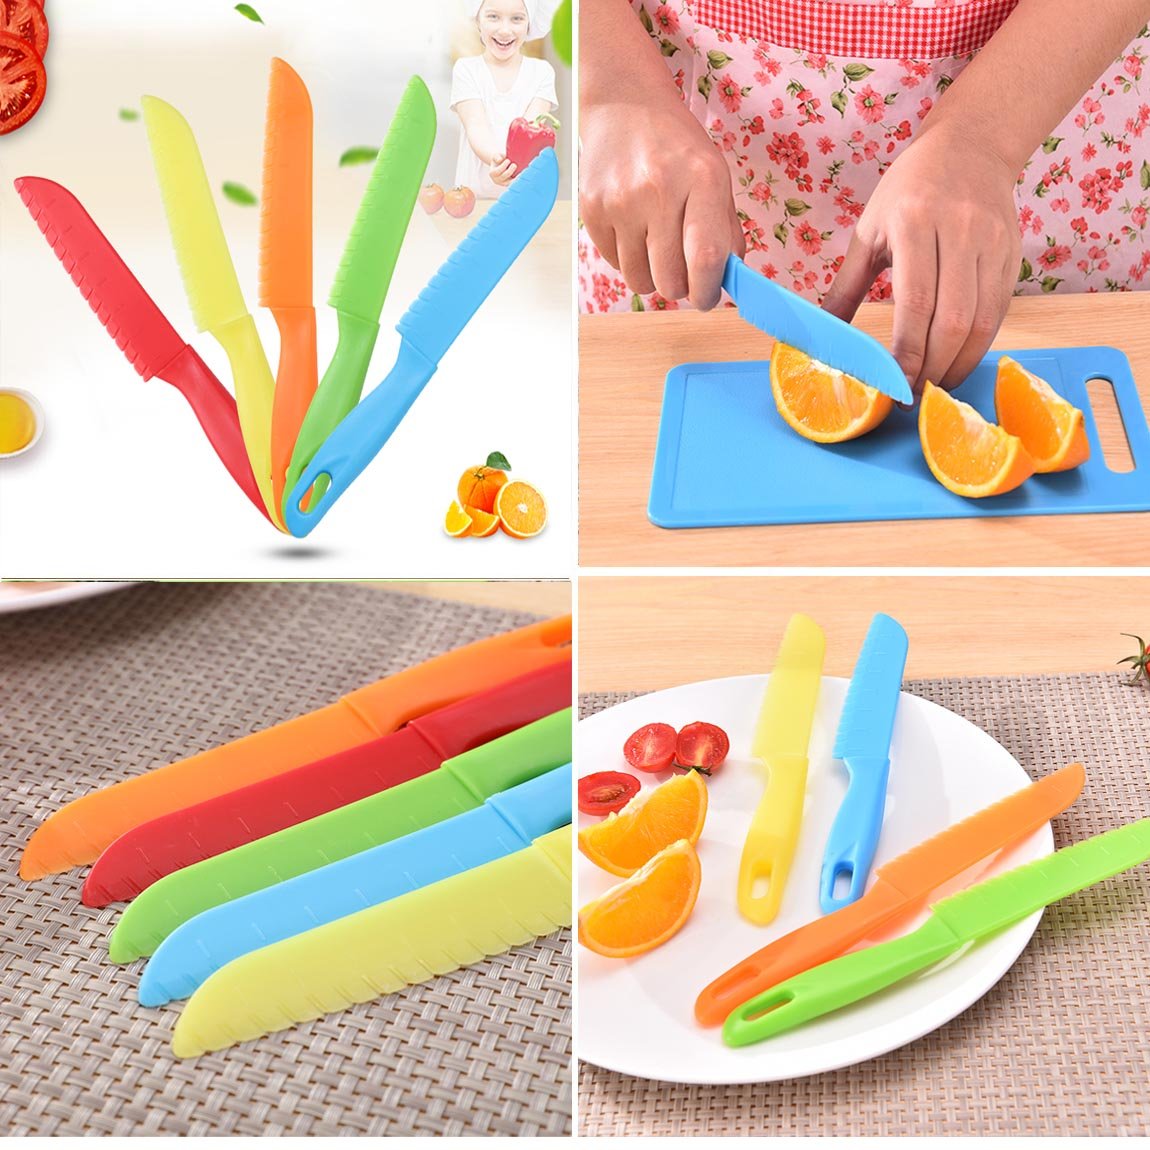 ONUPGO Knives for Kids 10 Pieces Plastic Kitchen Baking Knife Set, Montessori Kitchen Tools for Toddlers-Kids Cooking Sets, Real Kids Safe Cooking Knives in 10 Colors